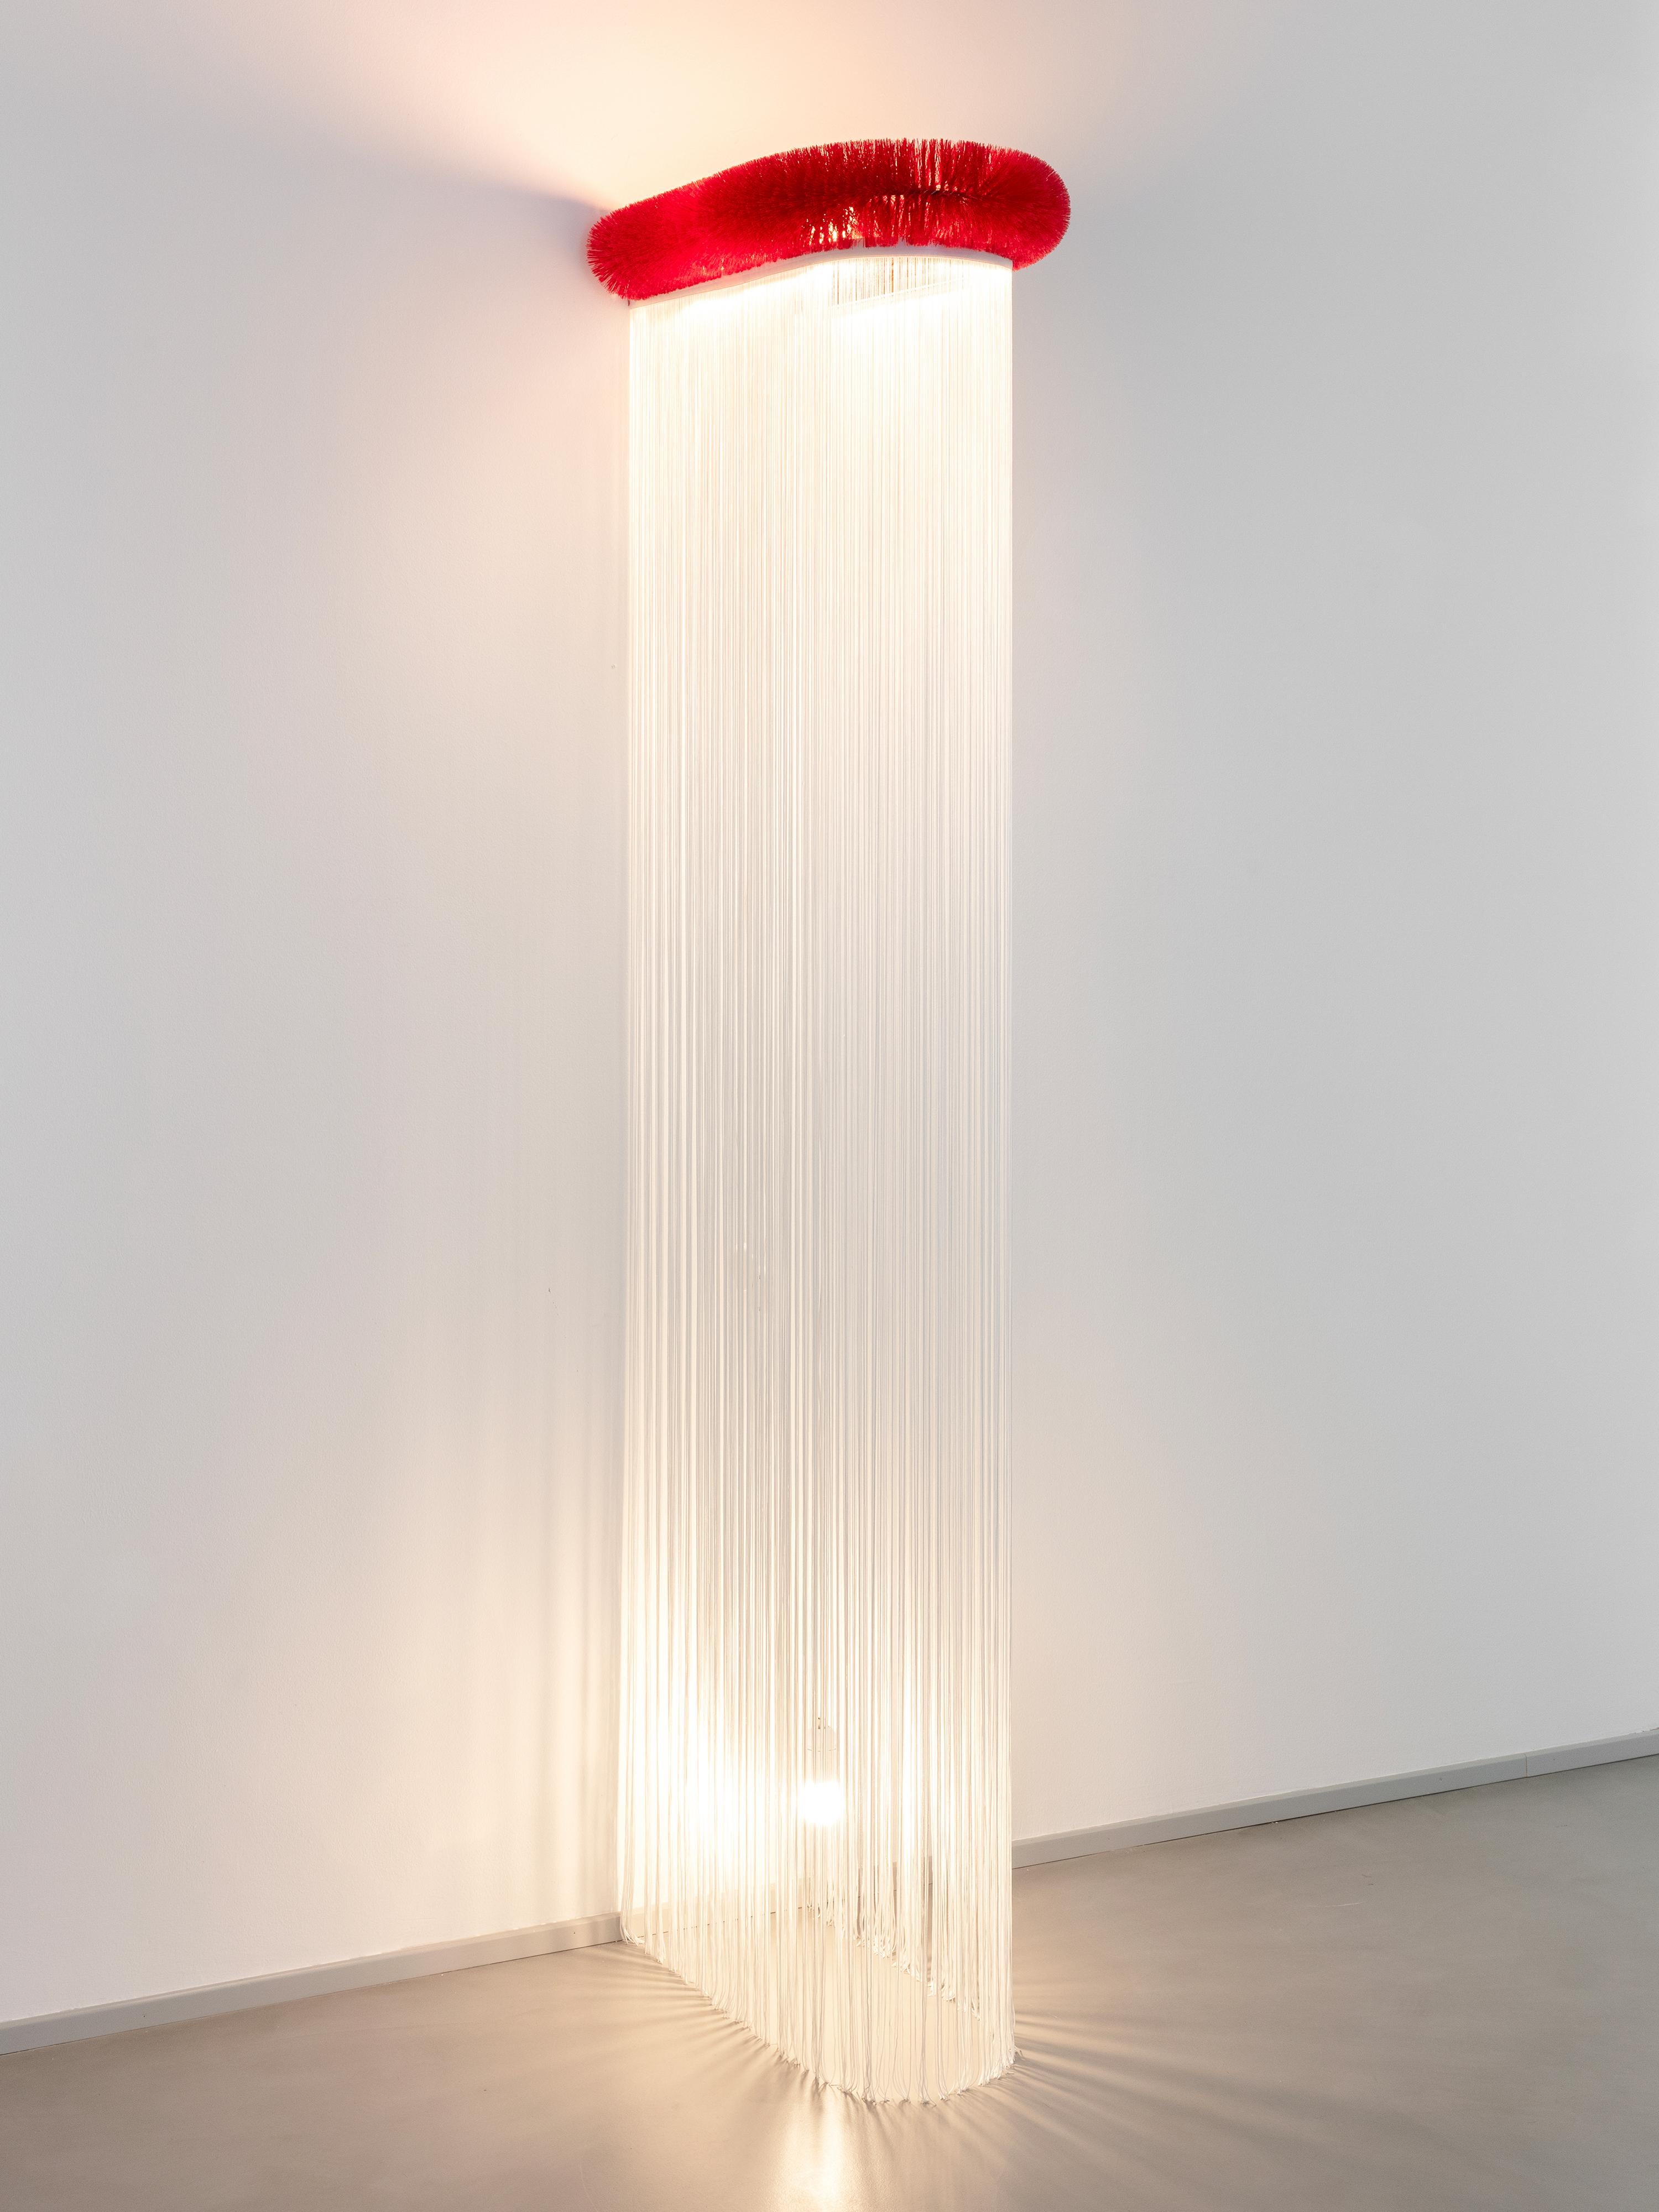 Materials: fabric fringes, pvc bristles, metal structure, led strip, 2 light bulbs. 

Colours: red; also available in blue or brown.

Paola Pivi creates exclusively for Paradisoterrestre Let’em shine art, presented for the first time in the